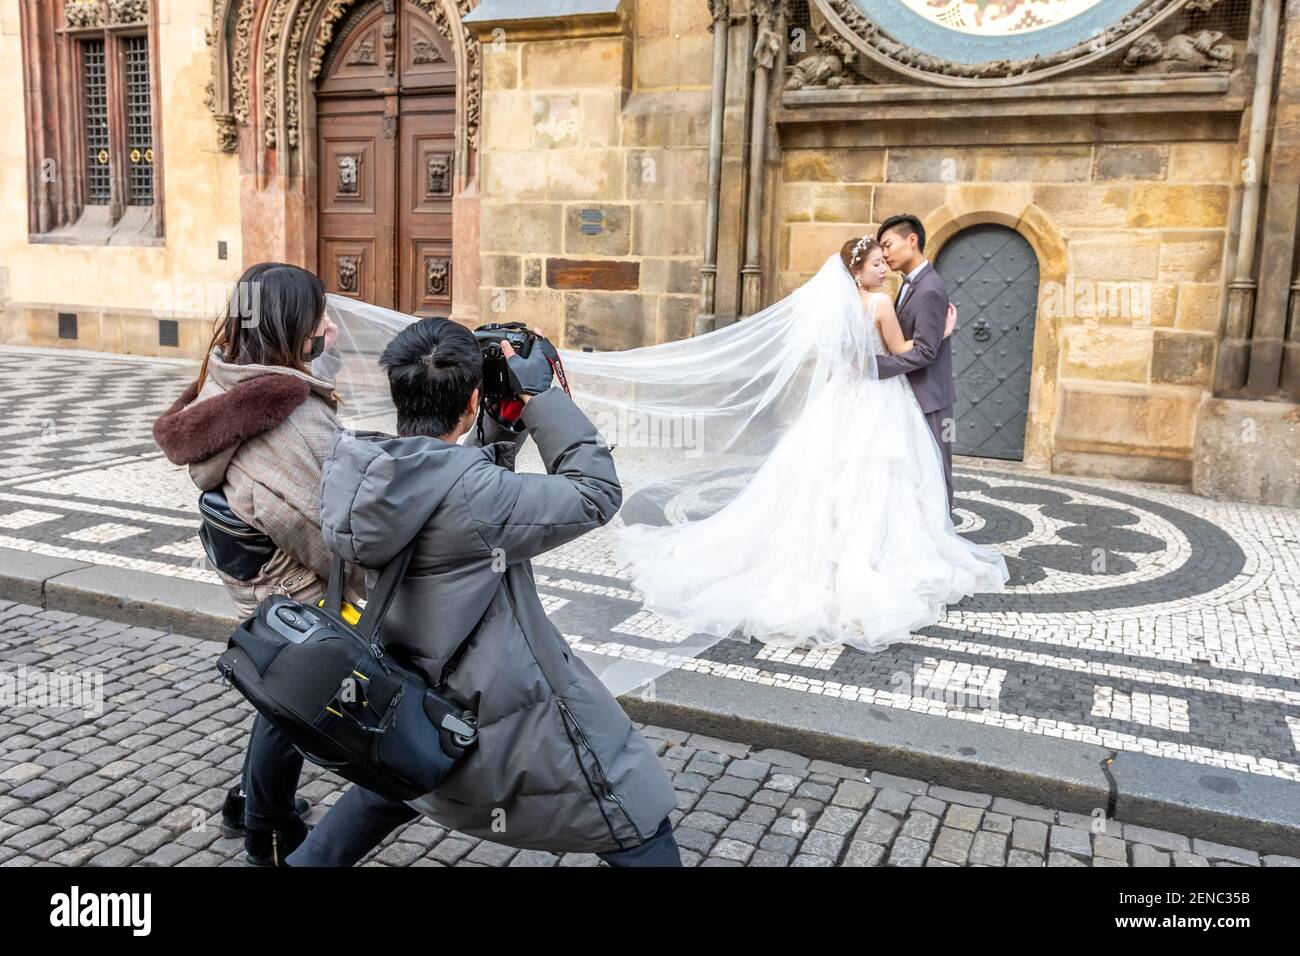 Prague, Czech Republic -January 20, 2020: Chinese photographer takes pictures of a wedding couple. Stock Photo